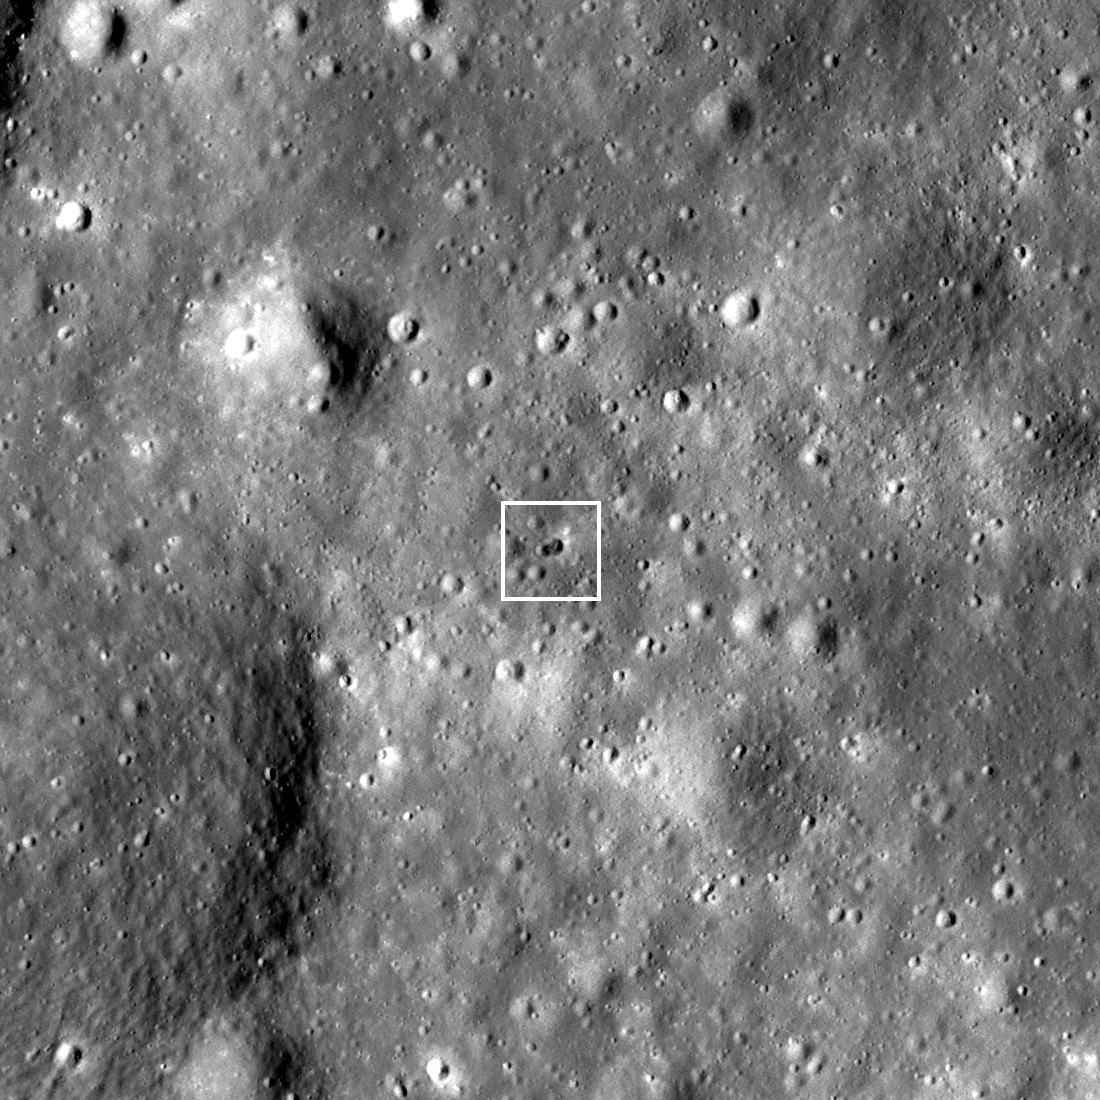 rocky, grayscale lunar landscape, as seen from above by LRO; a white square outline indicates the rocket body impact site